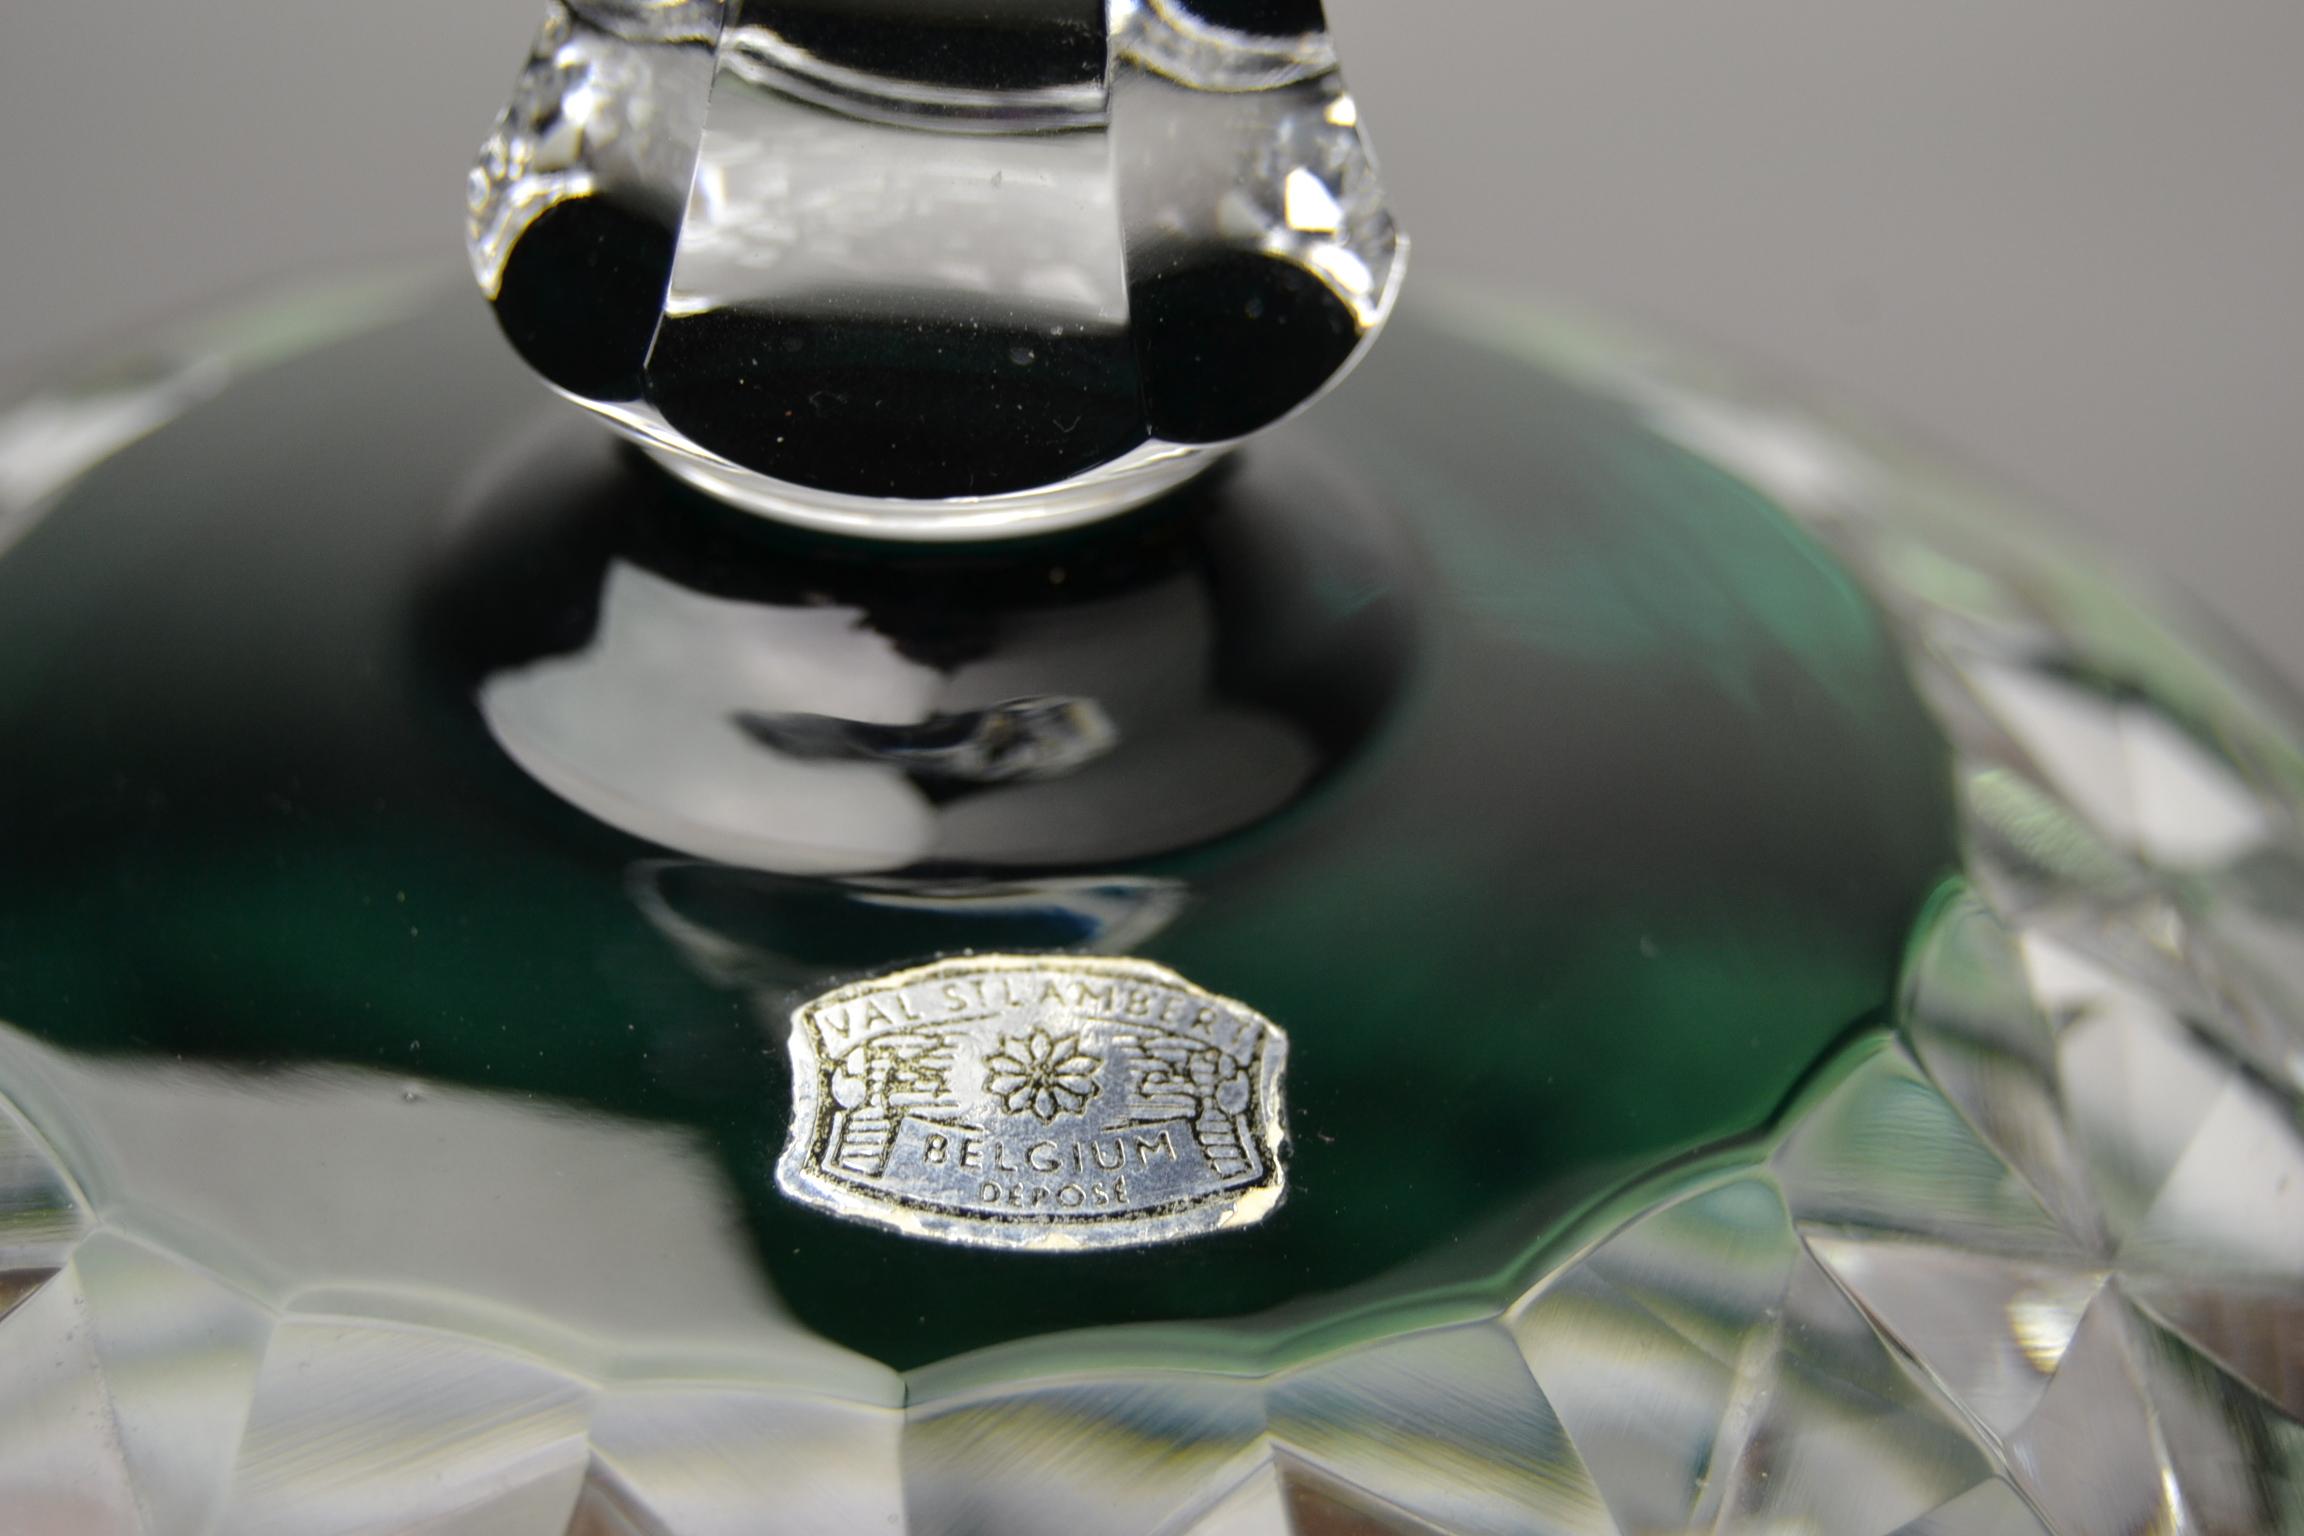 Great Tabletop Accessory, 
A Crystal Candy Box - Bonbon Box - Chocolat Box - Sweet Box - Candy Jar - Bonbonniere
made by the Prestigious Belgian Company Val Saint Lambert - VSL; 
 Worldwide known for their High Quality of products. 

This Dark Green